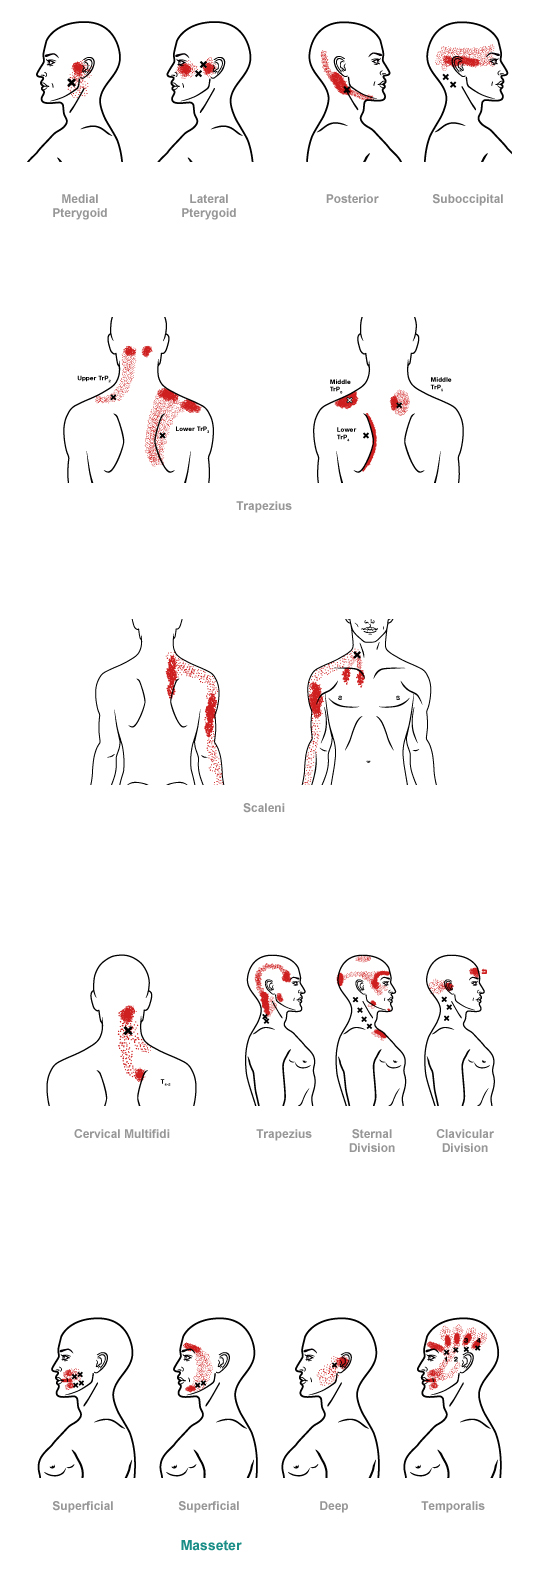 trigger point referral pain pattern for the head & neck